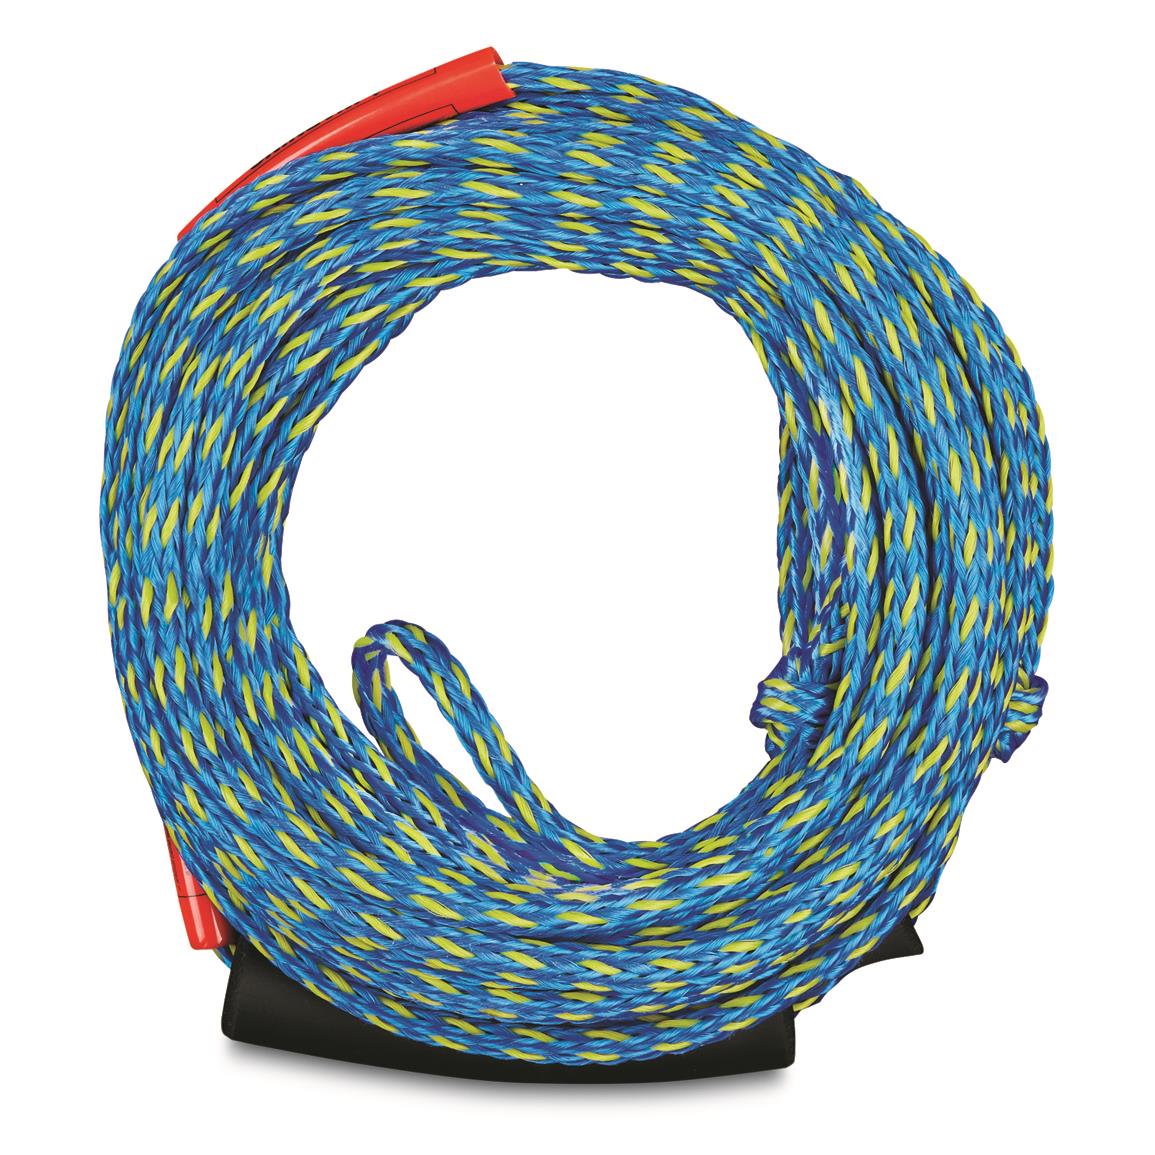 1 RIDER STEARN`S SPORT DELUXE TUBE TOW ROPE 60' 